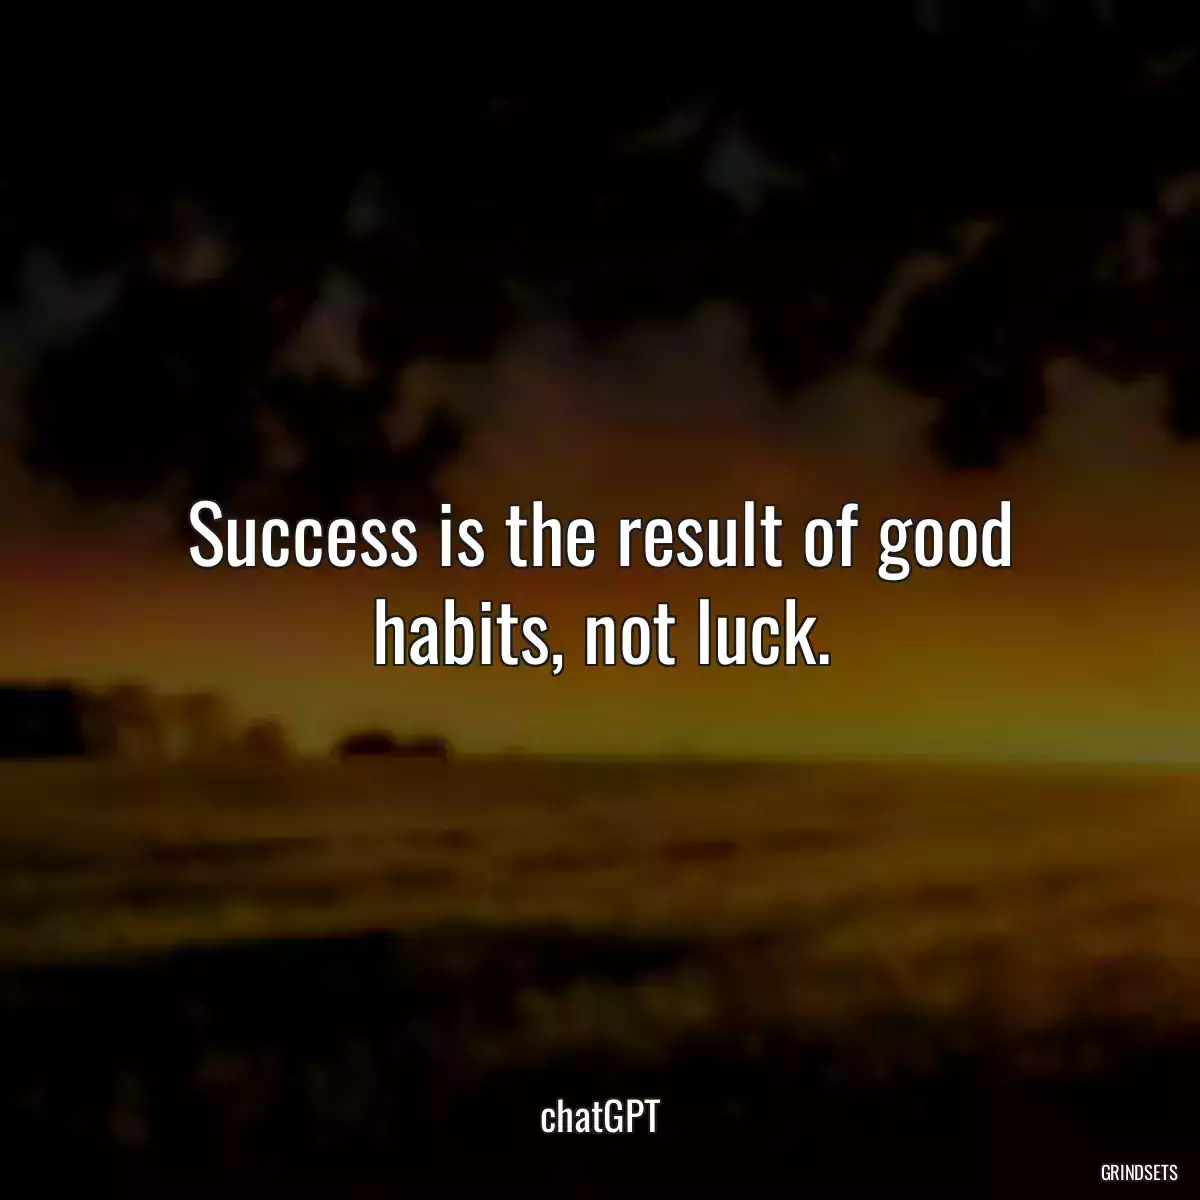 Success is the result of good habits, not luck.